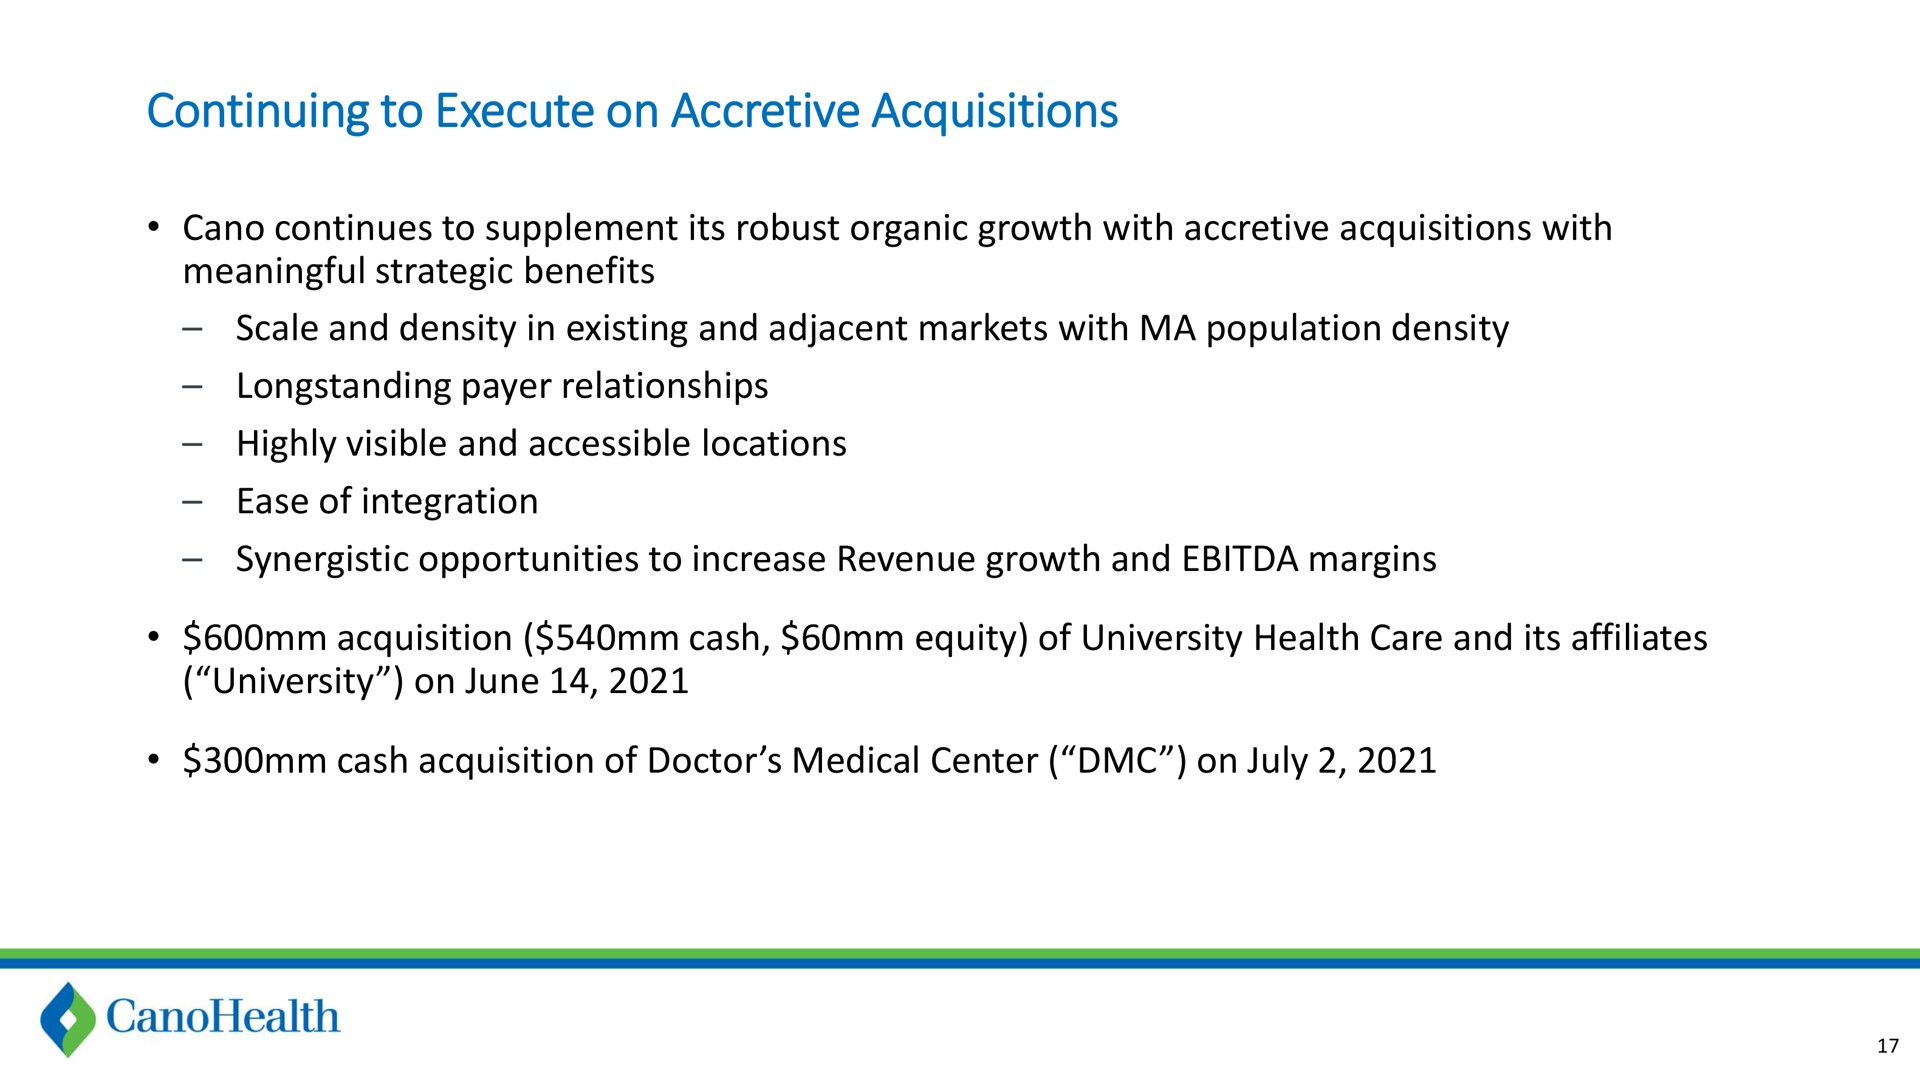 continuing to execute on accretive acquisitions continues to supplement its robust organic growth with accretive acquisitions with meaningful strategic benefits scale and density in existing and adjacent markets with population density payer relationships highly visible and accessible locations ease of integration synergistic opportunities to increase revenue growth and margins acquisition cash equity of university health care and its affiliates university on june cash acquisition of doctor medical center on | Cano Health